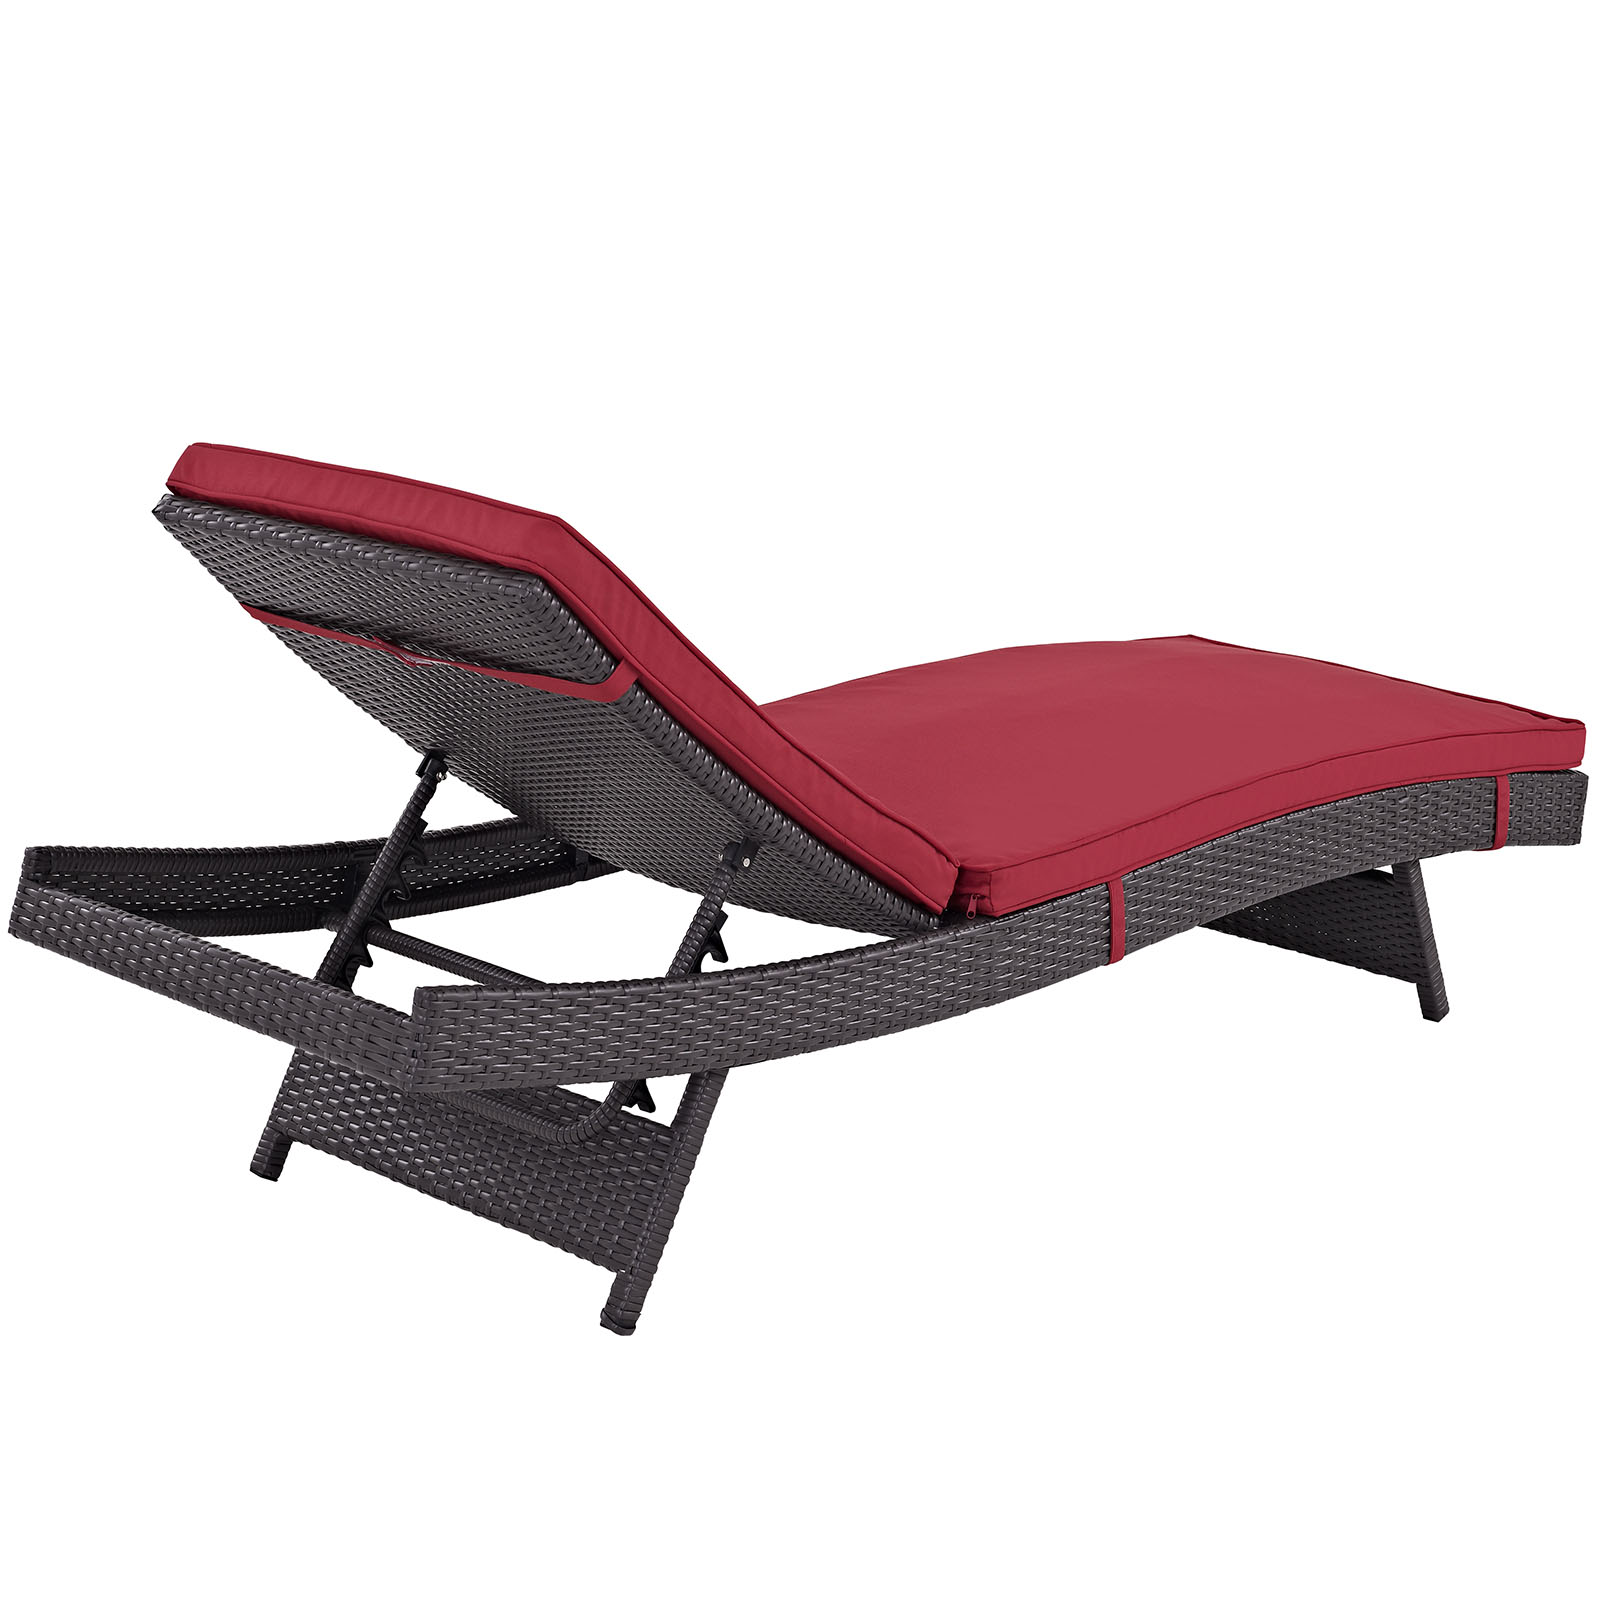 Modway Convene Chaise Outdoor Patio Set of 2 in Espresso Red - image 4 of 4